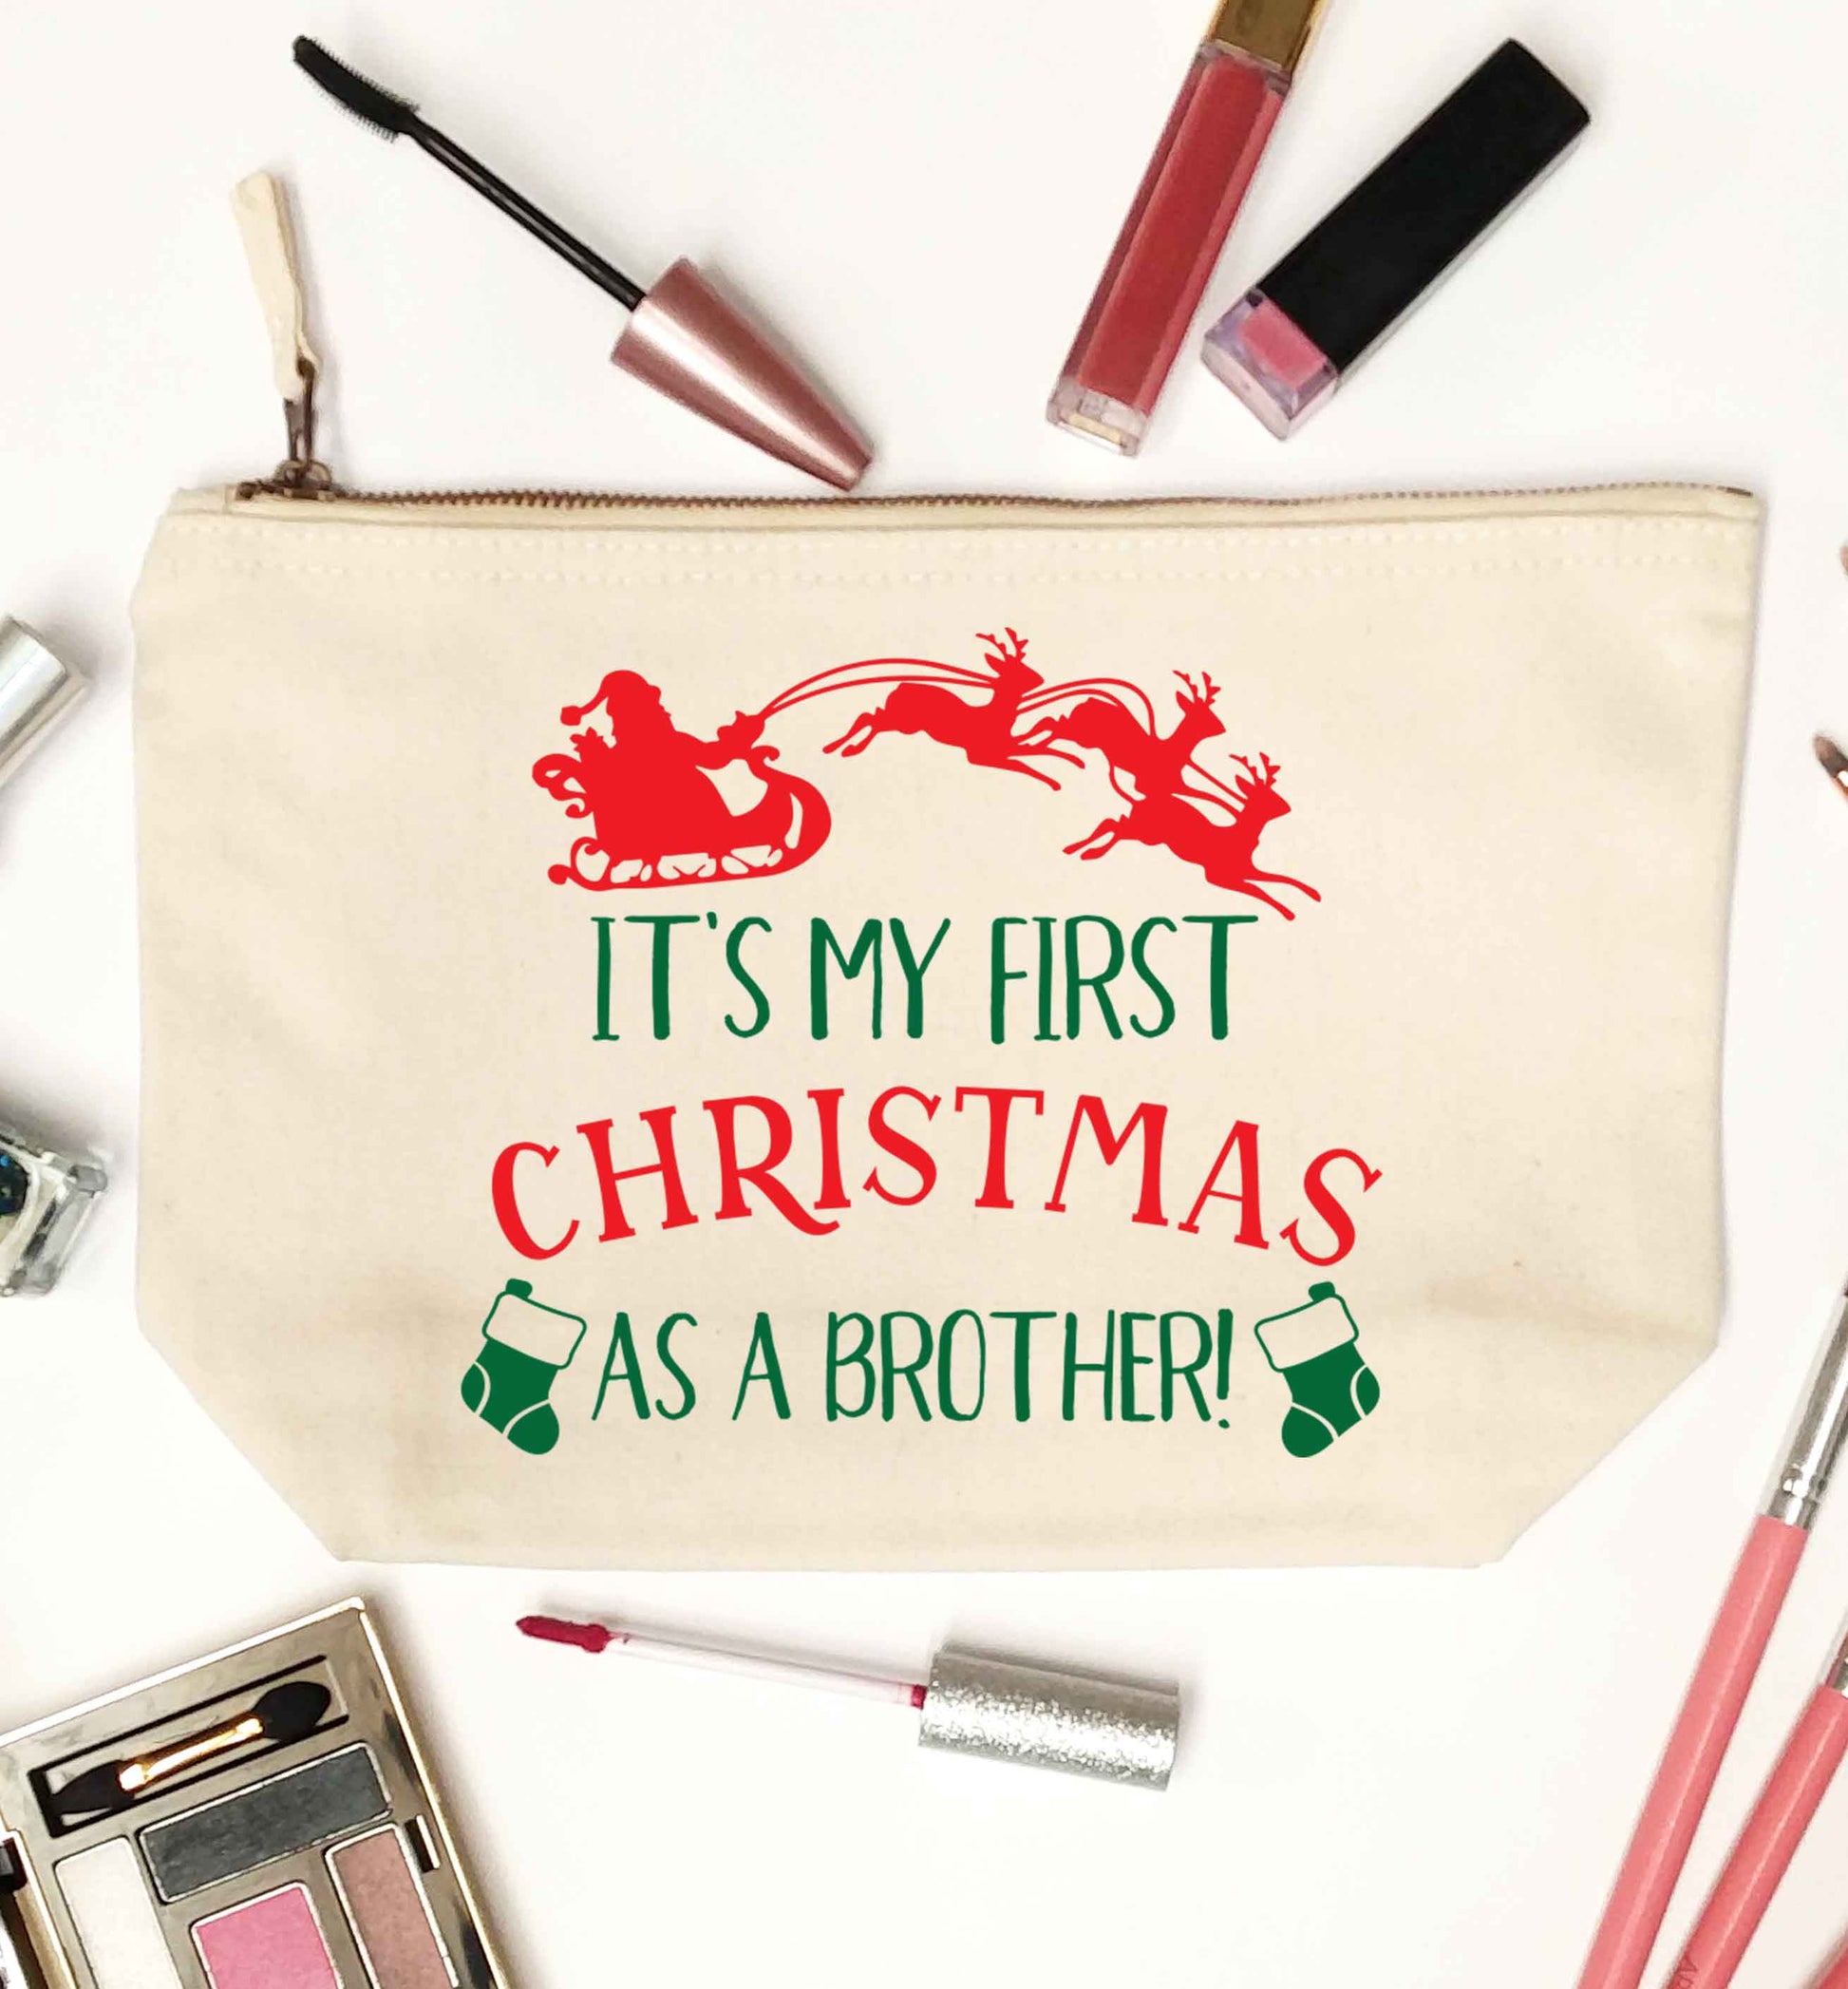 It's my first Christmas as a brother! natural makeup bag